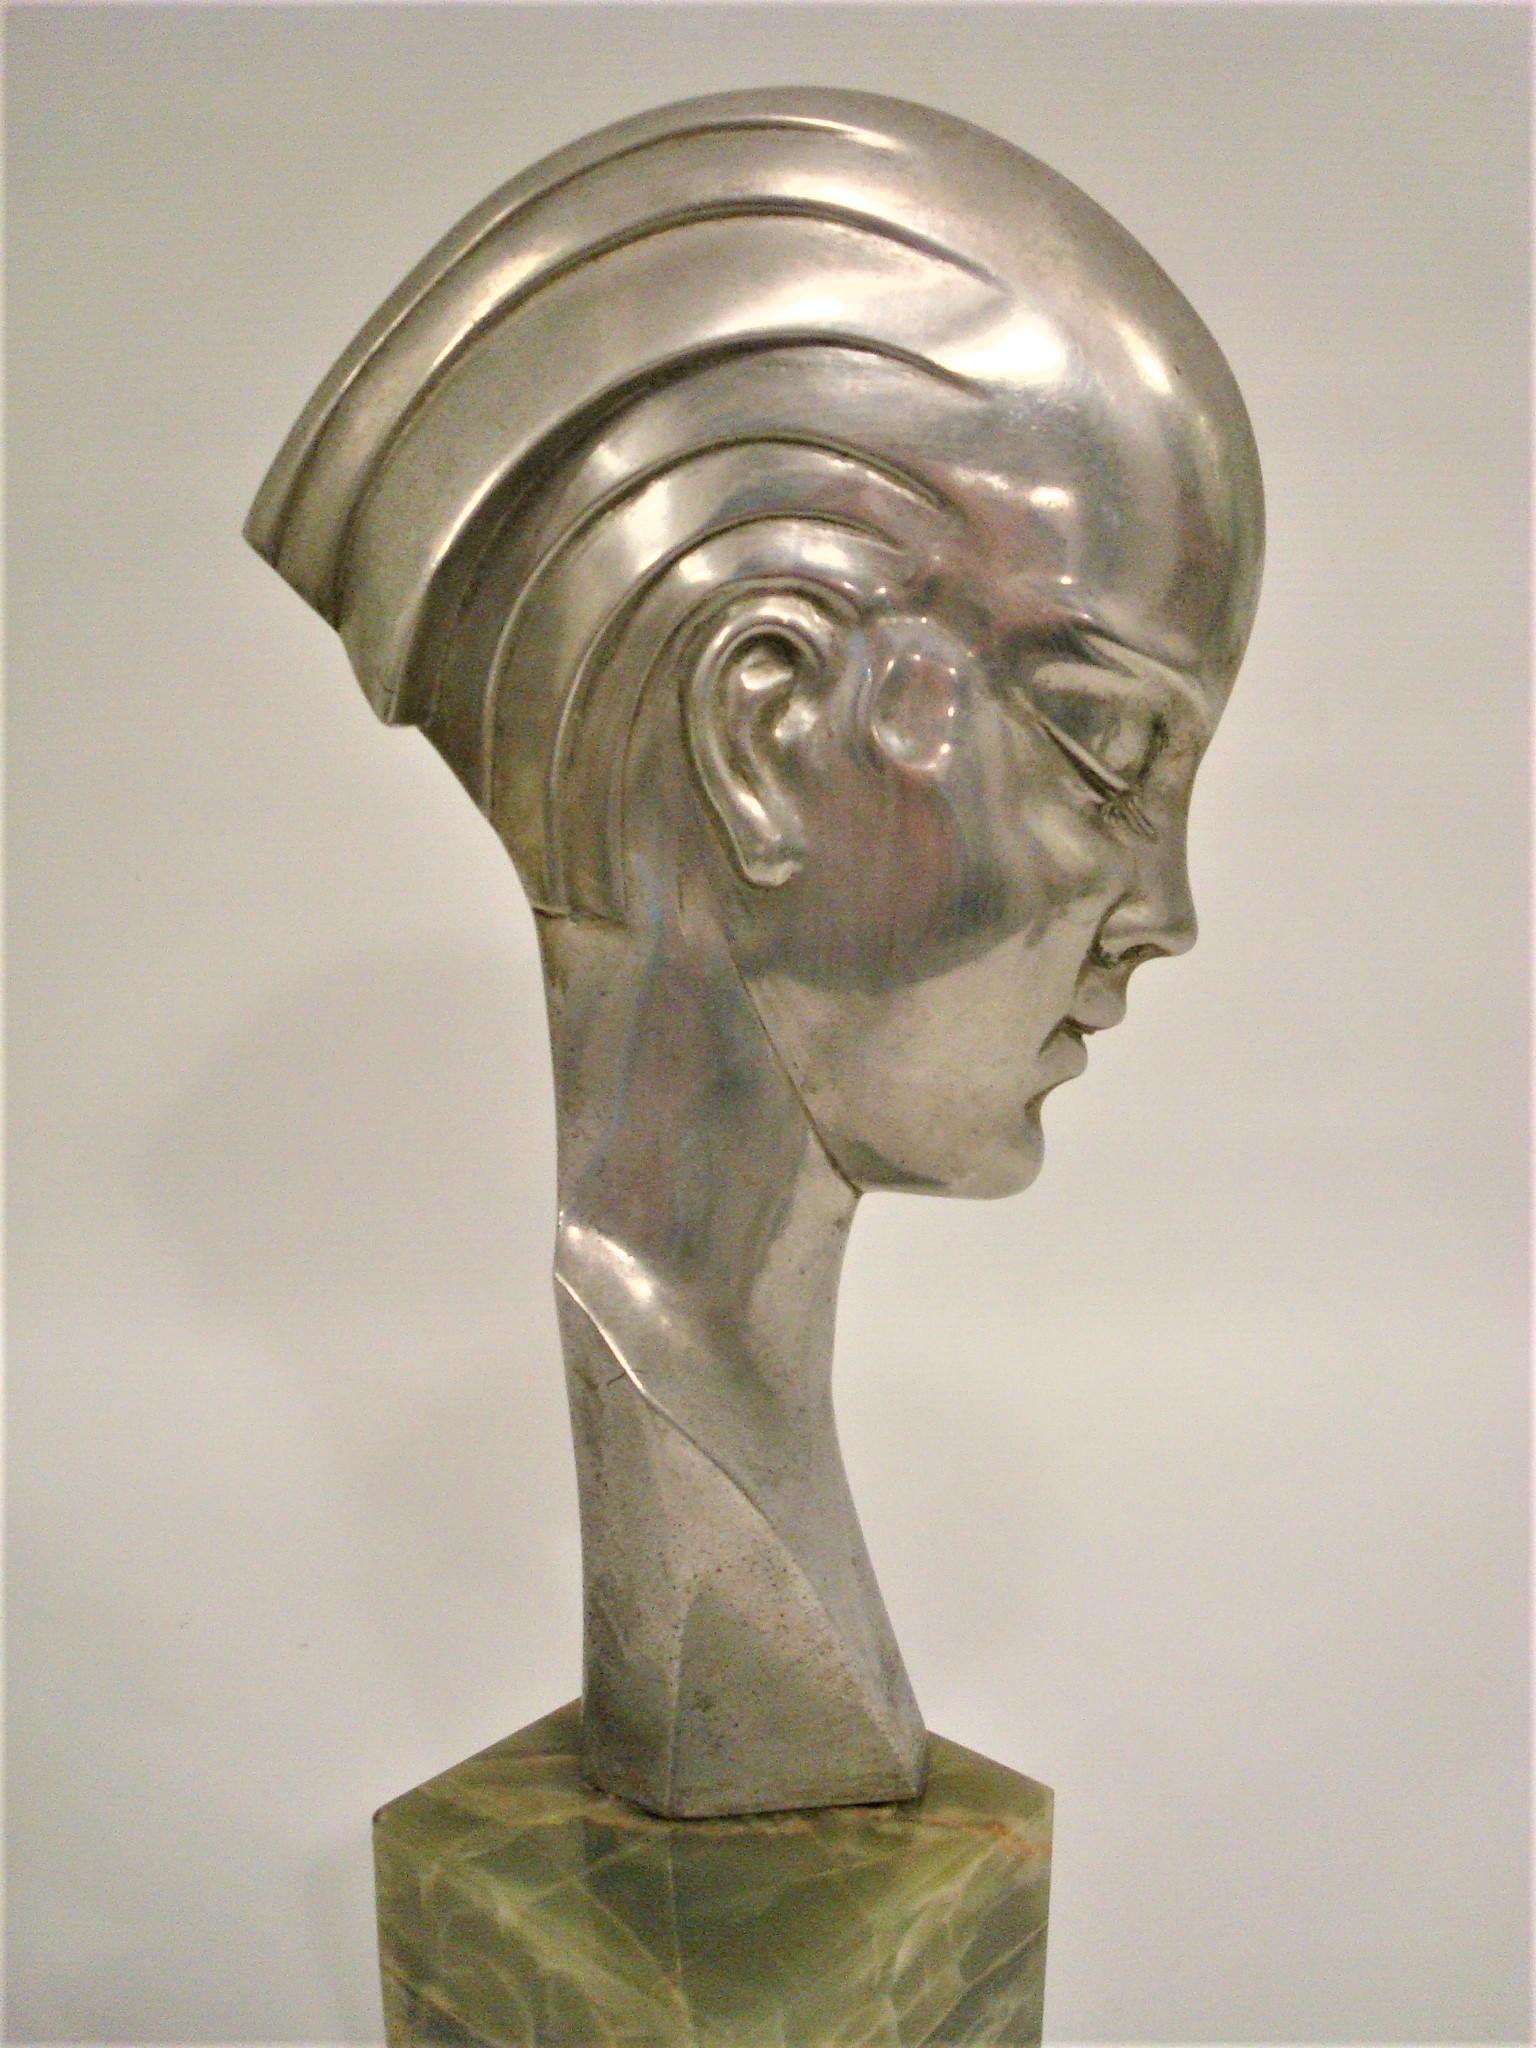 Stylish Art Deco bronze bust of a woman in profile.
Attributed to Guido Cacciapuoti.
The bronze has a silver patina and stands on a green marble base.
Italy 1930-1940.